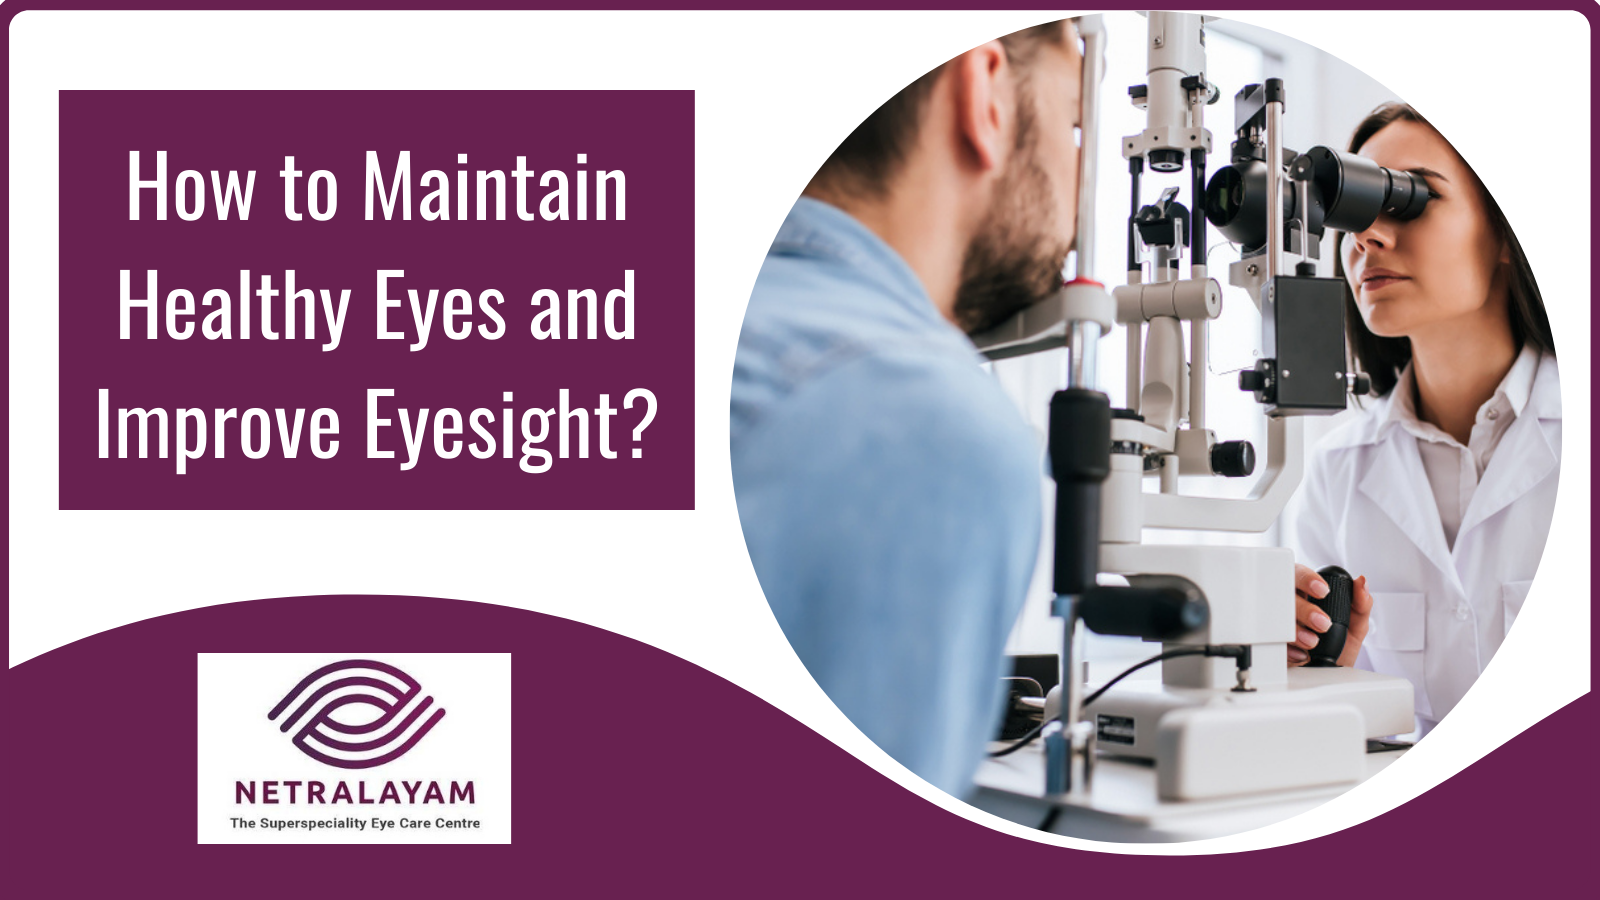 How to Maintain Healthy Eyes and Improve Eyesight?